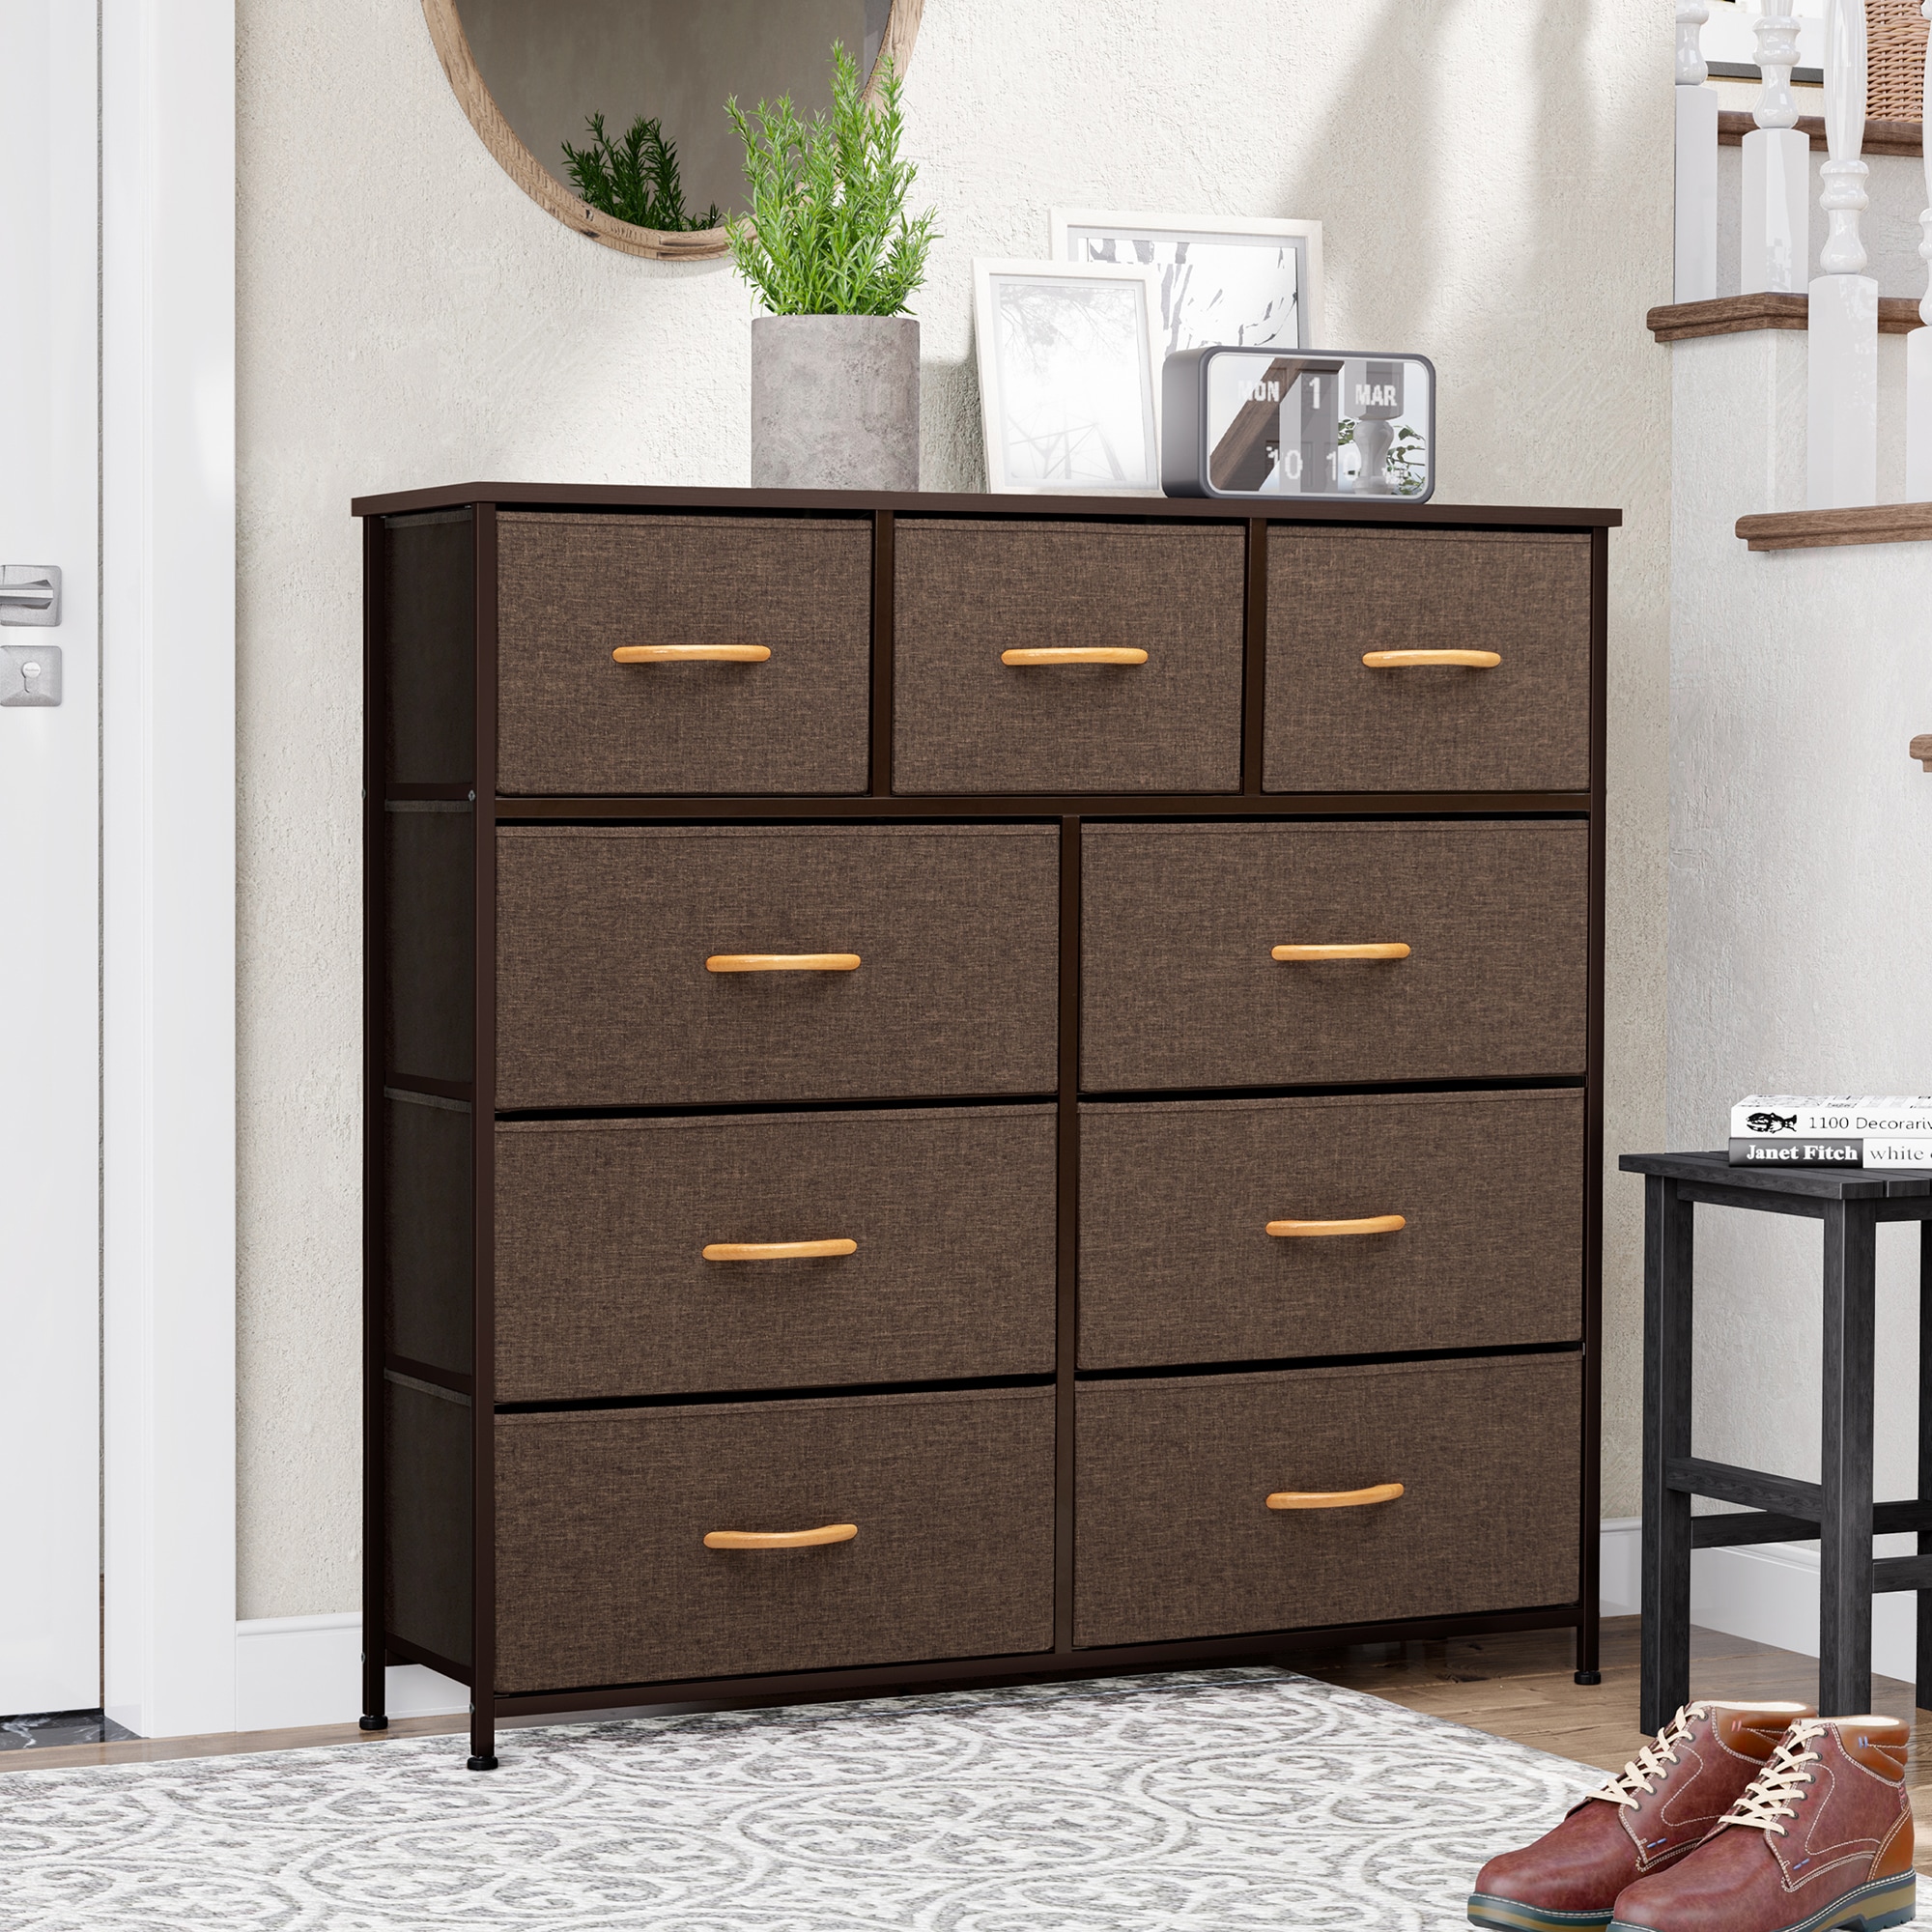 WAYTRIM Dresser for Bedroom Chest of 8 Drawers Storage Tower Steel Frame  Closet Fabric Cabinet Organizer in Home Brown